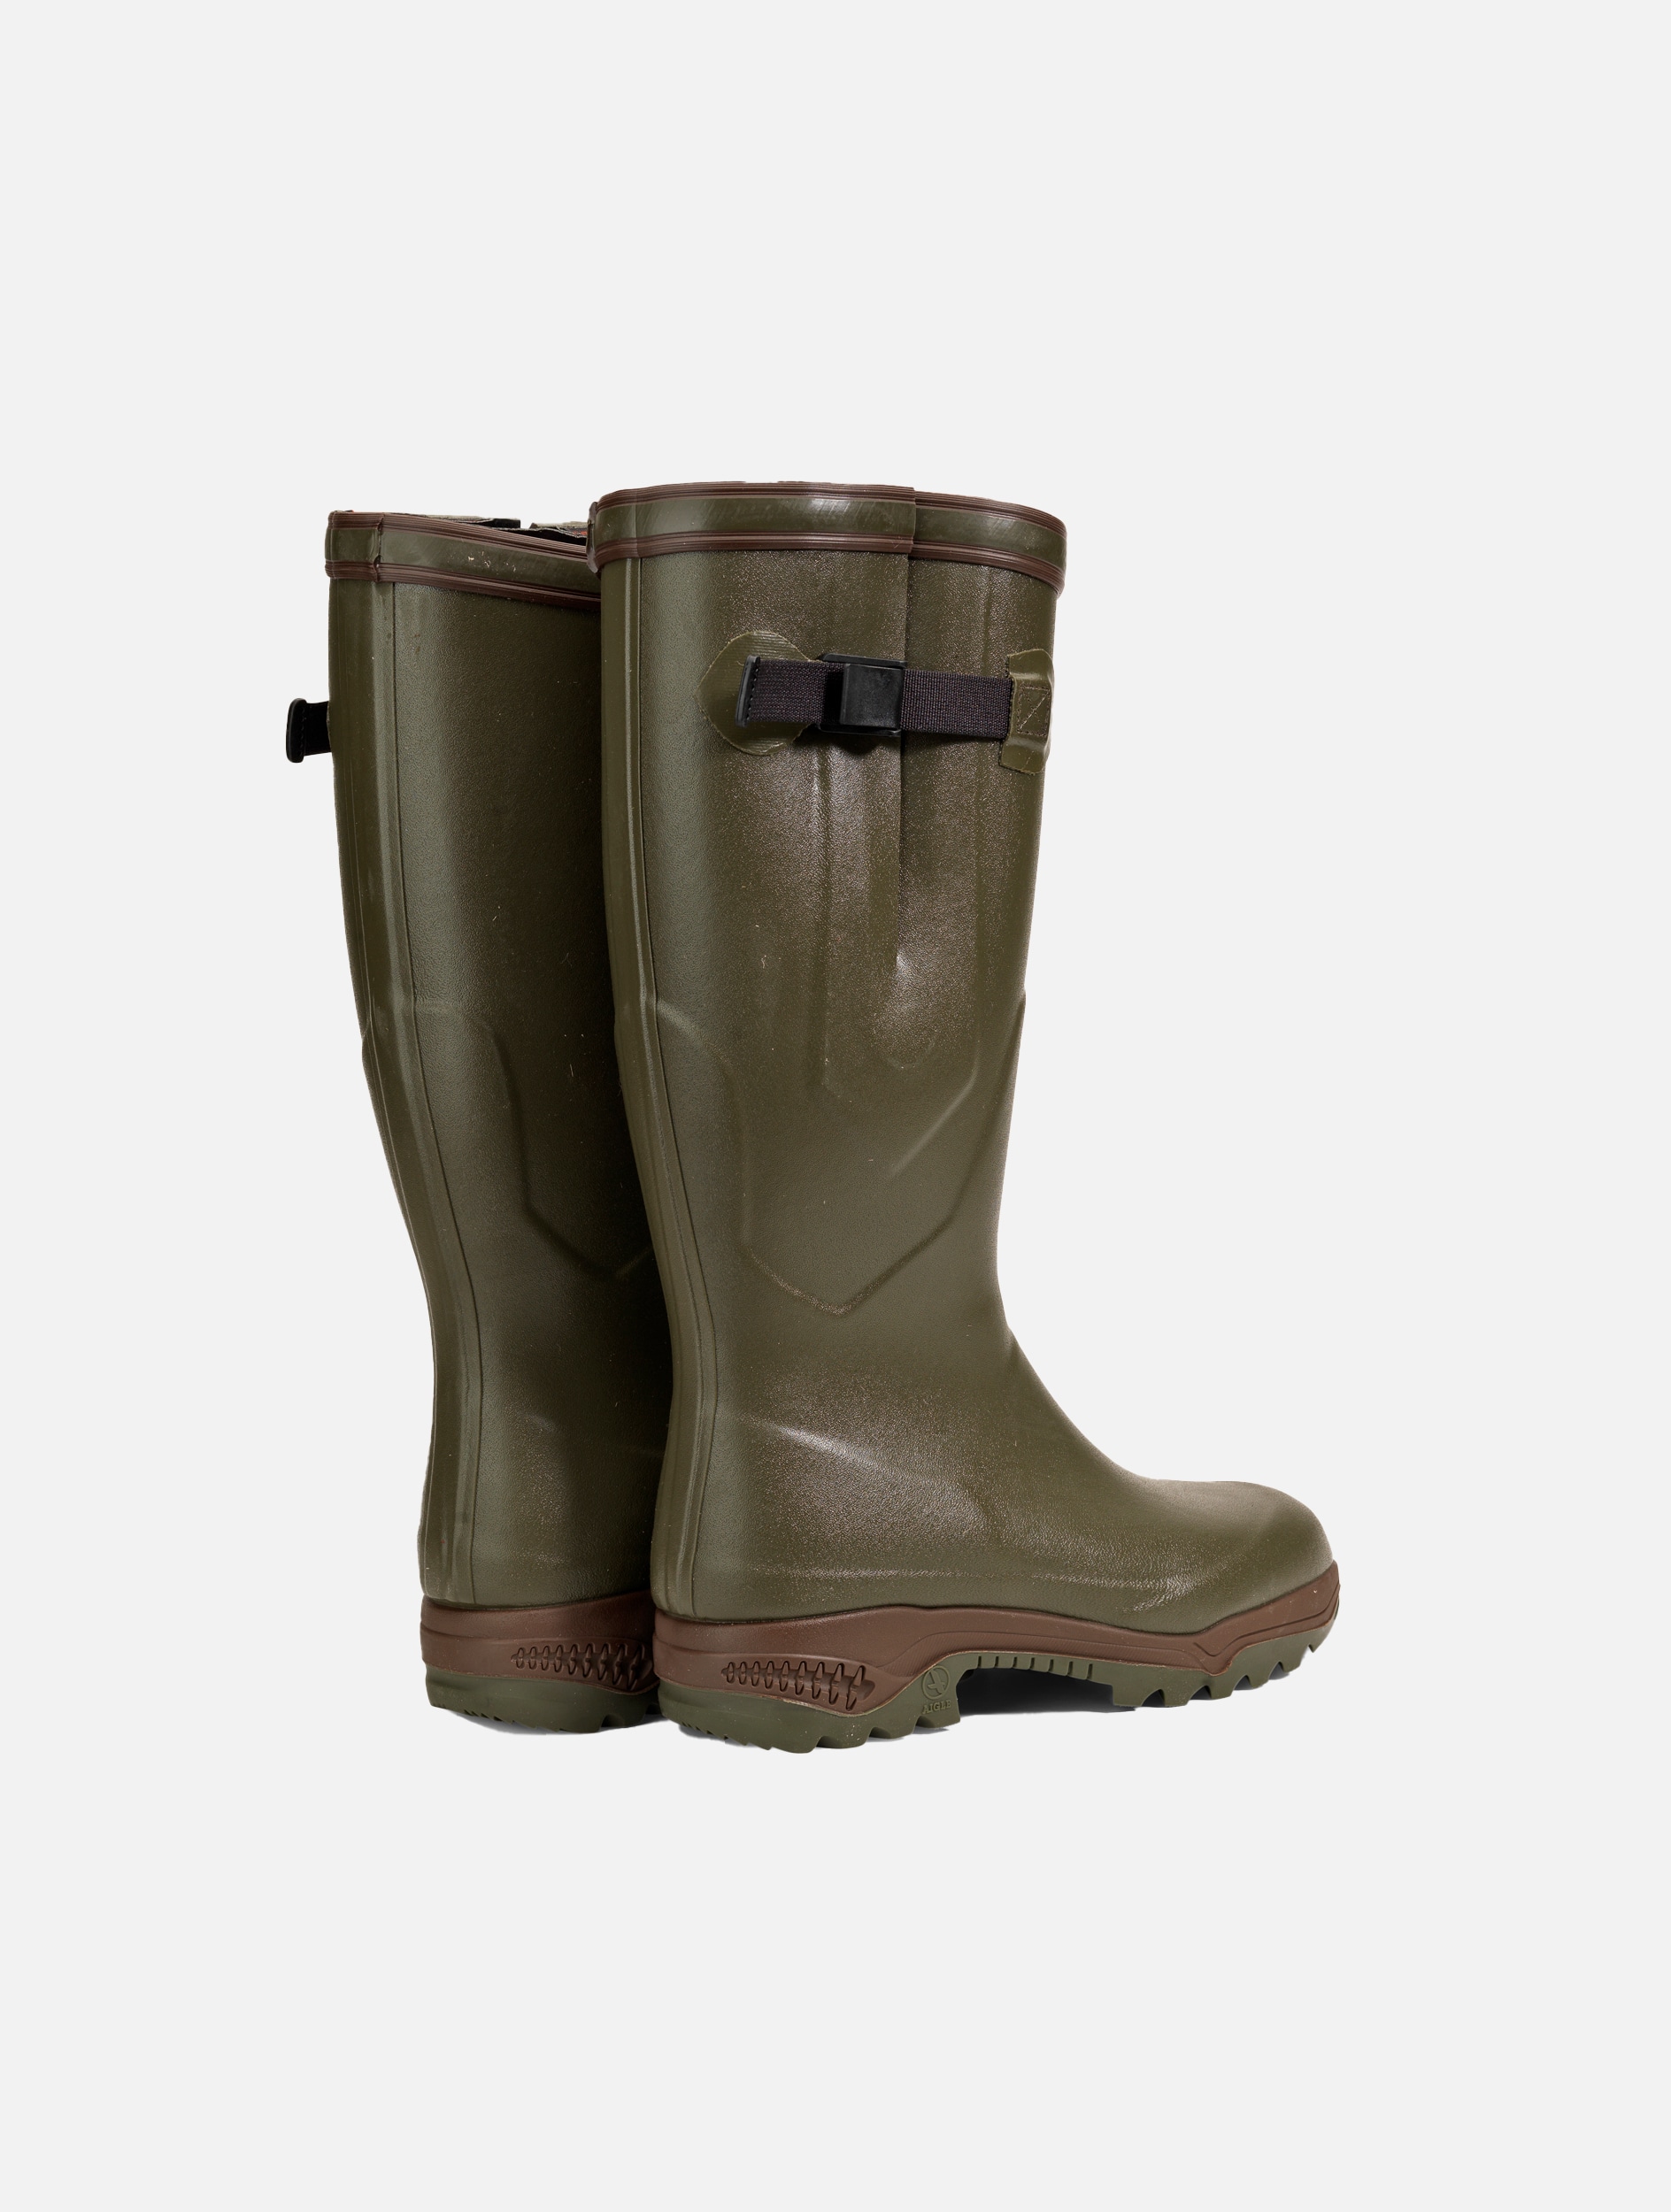 Aigle - Anti-fatigue boots cold weather, Made in France Kaki - Parcours® 2 iso | AIGLE